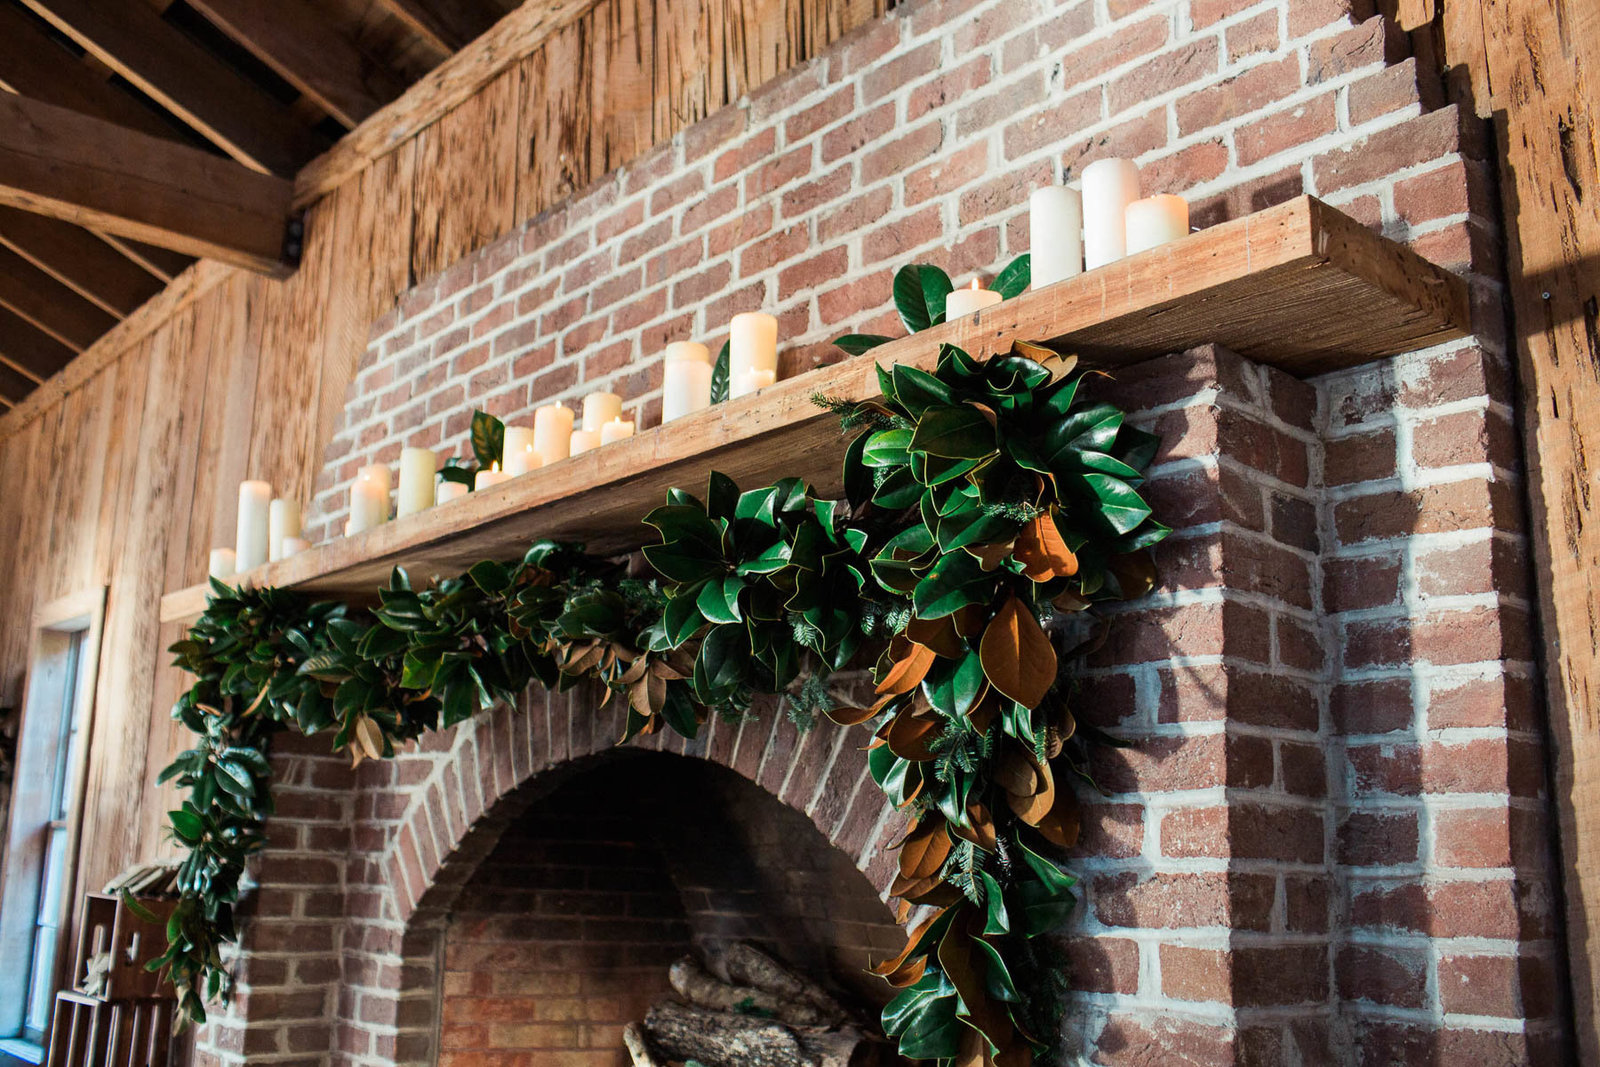 Cotton Dock fireplace is decorated with candles and garland, Boone Hall Plantation, Charleston, South Carolina